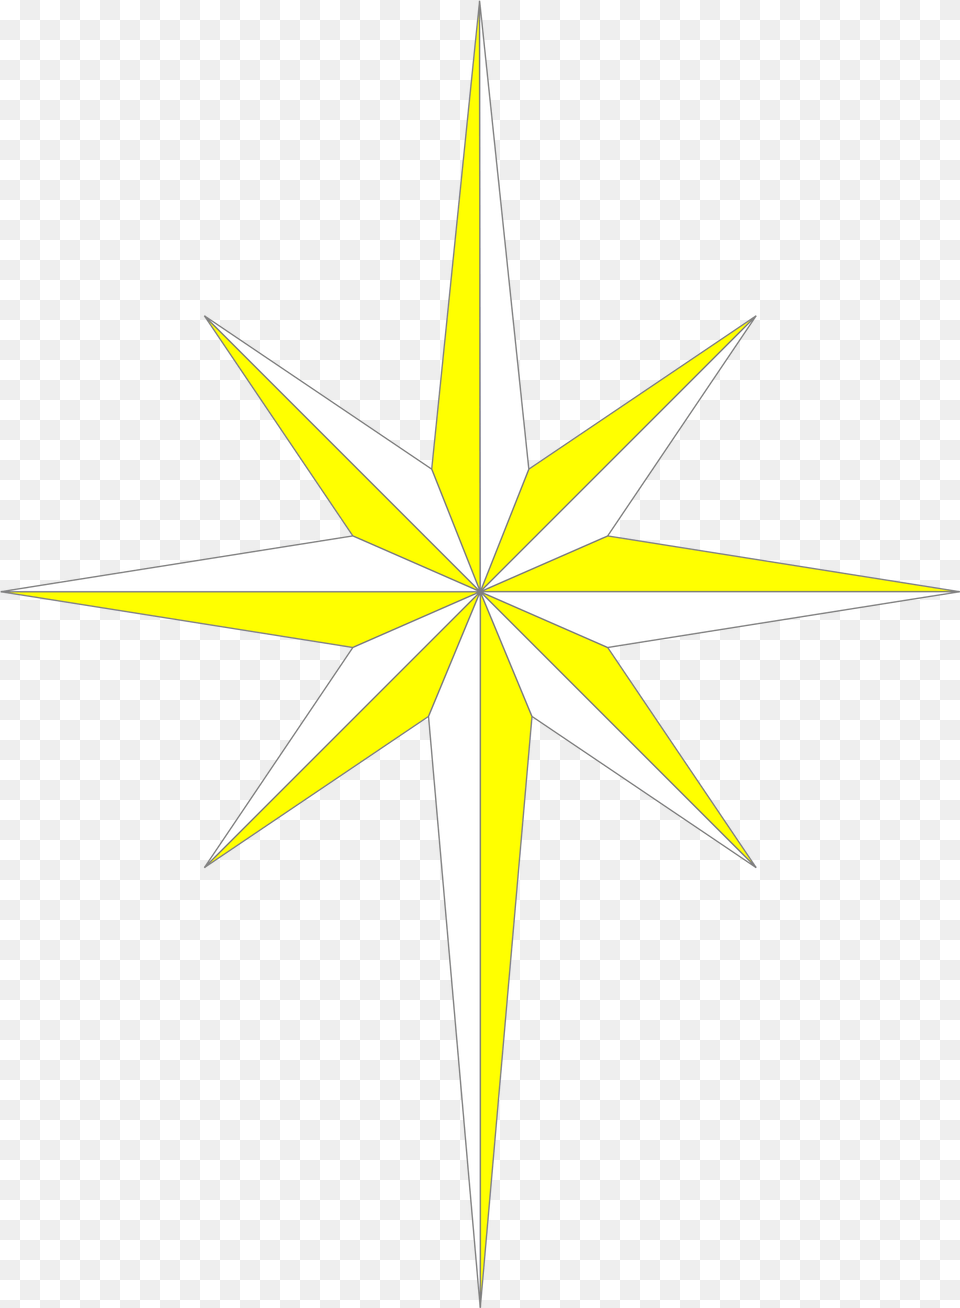 File Bethlehemstar Svg Wikimedia Commons Clipart Global Positioning Systems Directorate, Star Symbol, Symbol, Cross Png Image